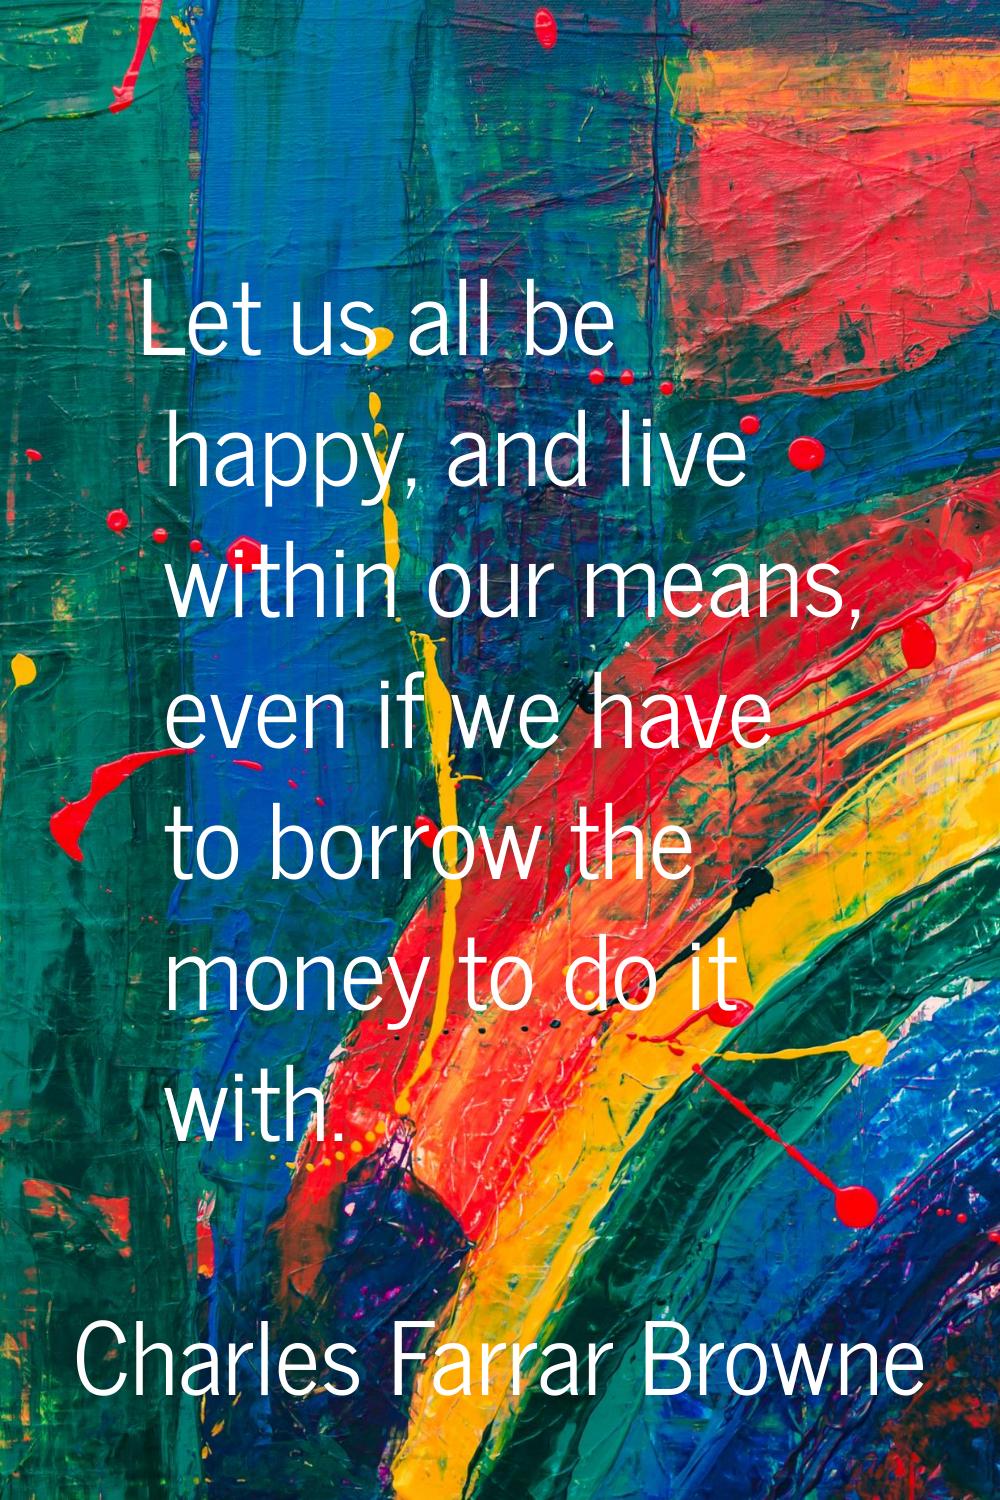 Let us all be happy, and live within our means, even if we have to borrow the money to do it with.